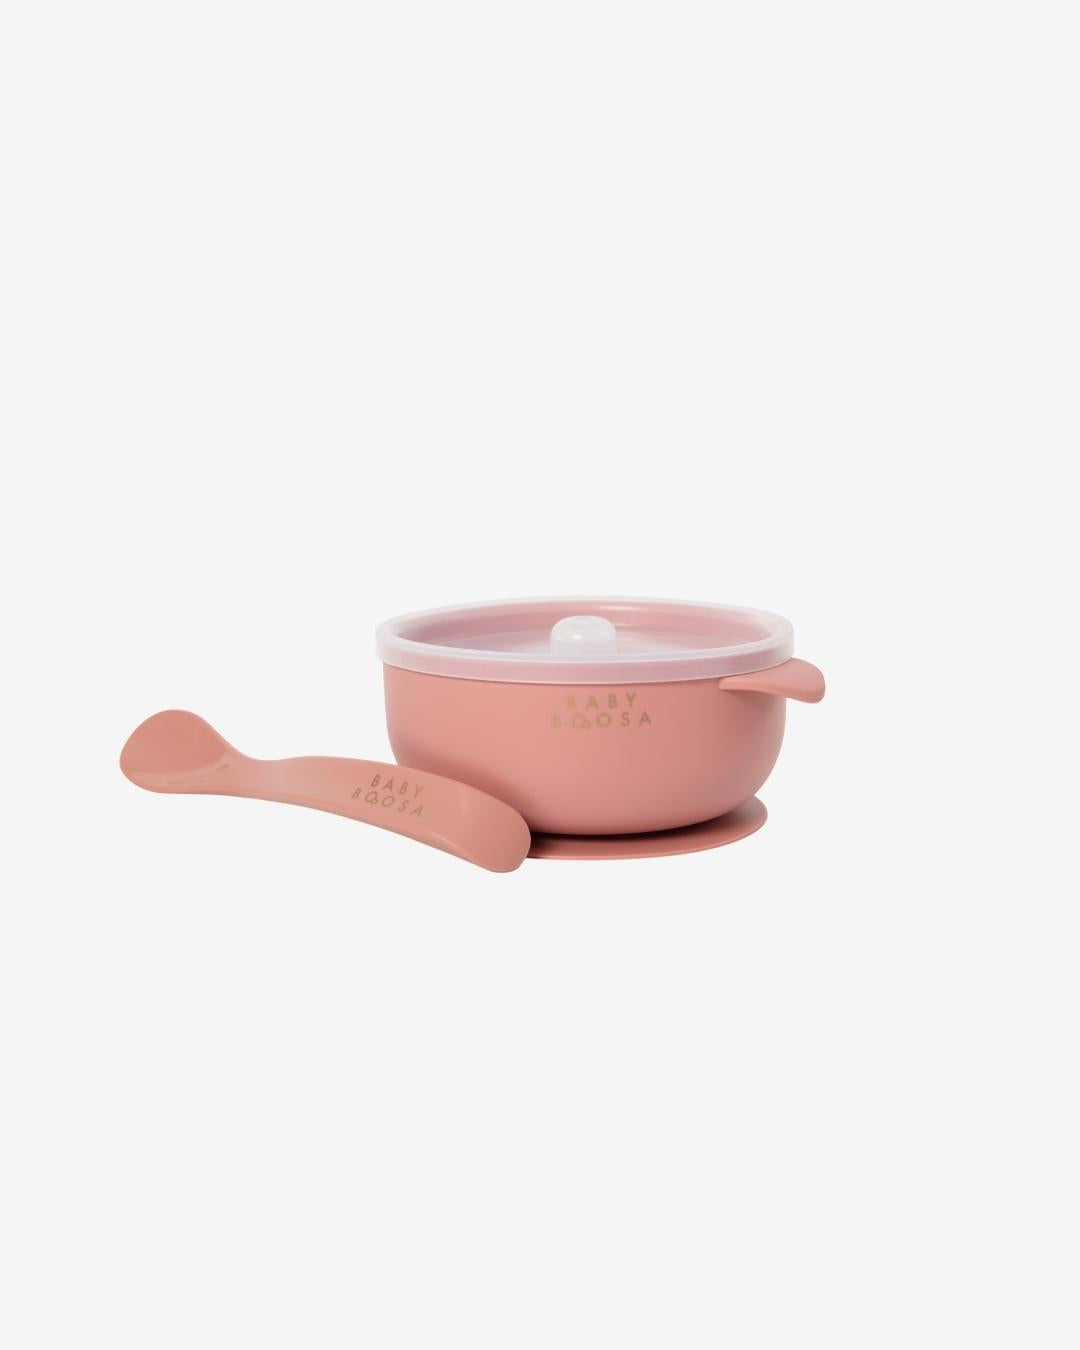 Weaning Gift Set | Luxe Silicone | All you need Essentials | Mess-Free | Grippy non-slip suction | Easy Clean | Dentist Developed (Dusky Rose) - £80 Value